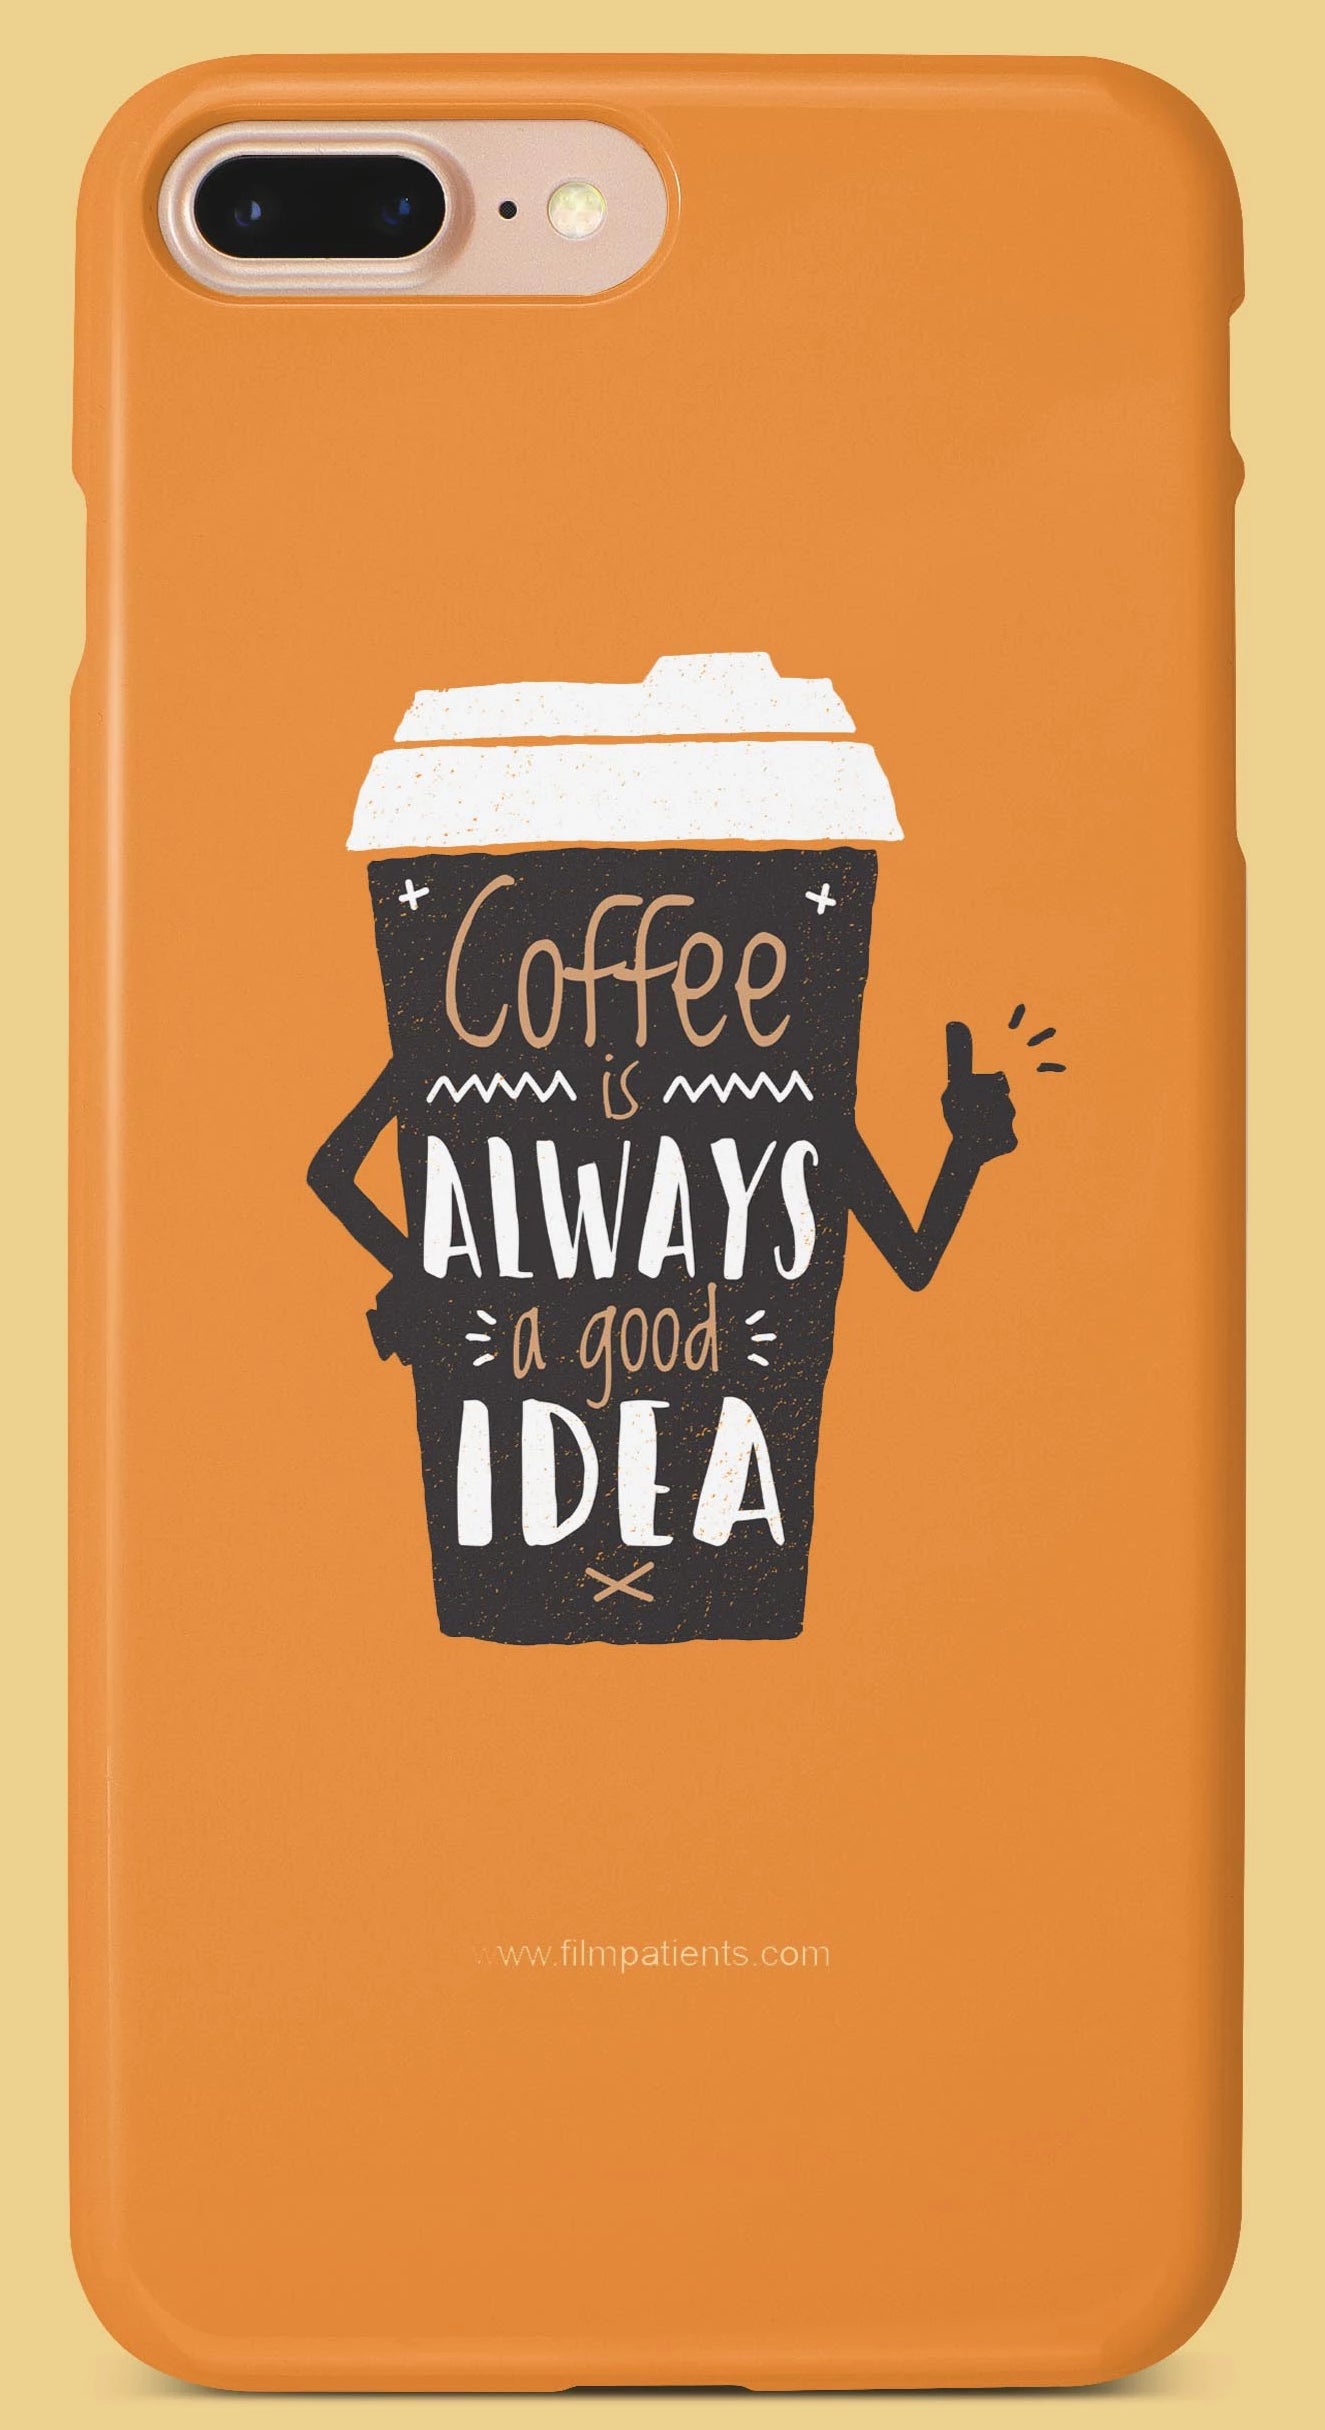 Coffee Lover Mobile Cover | Film Patients